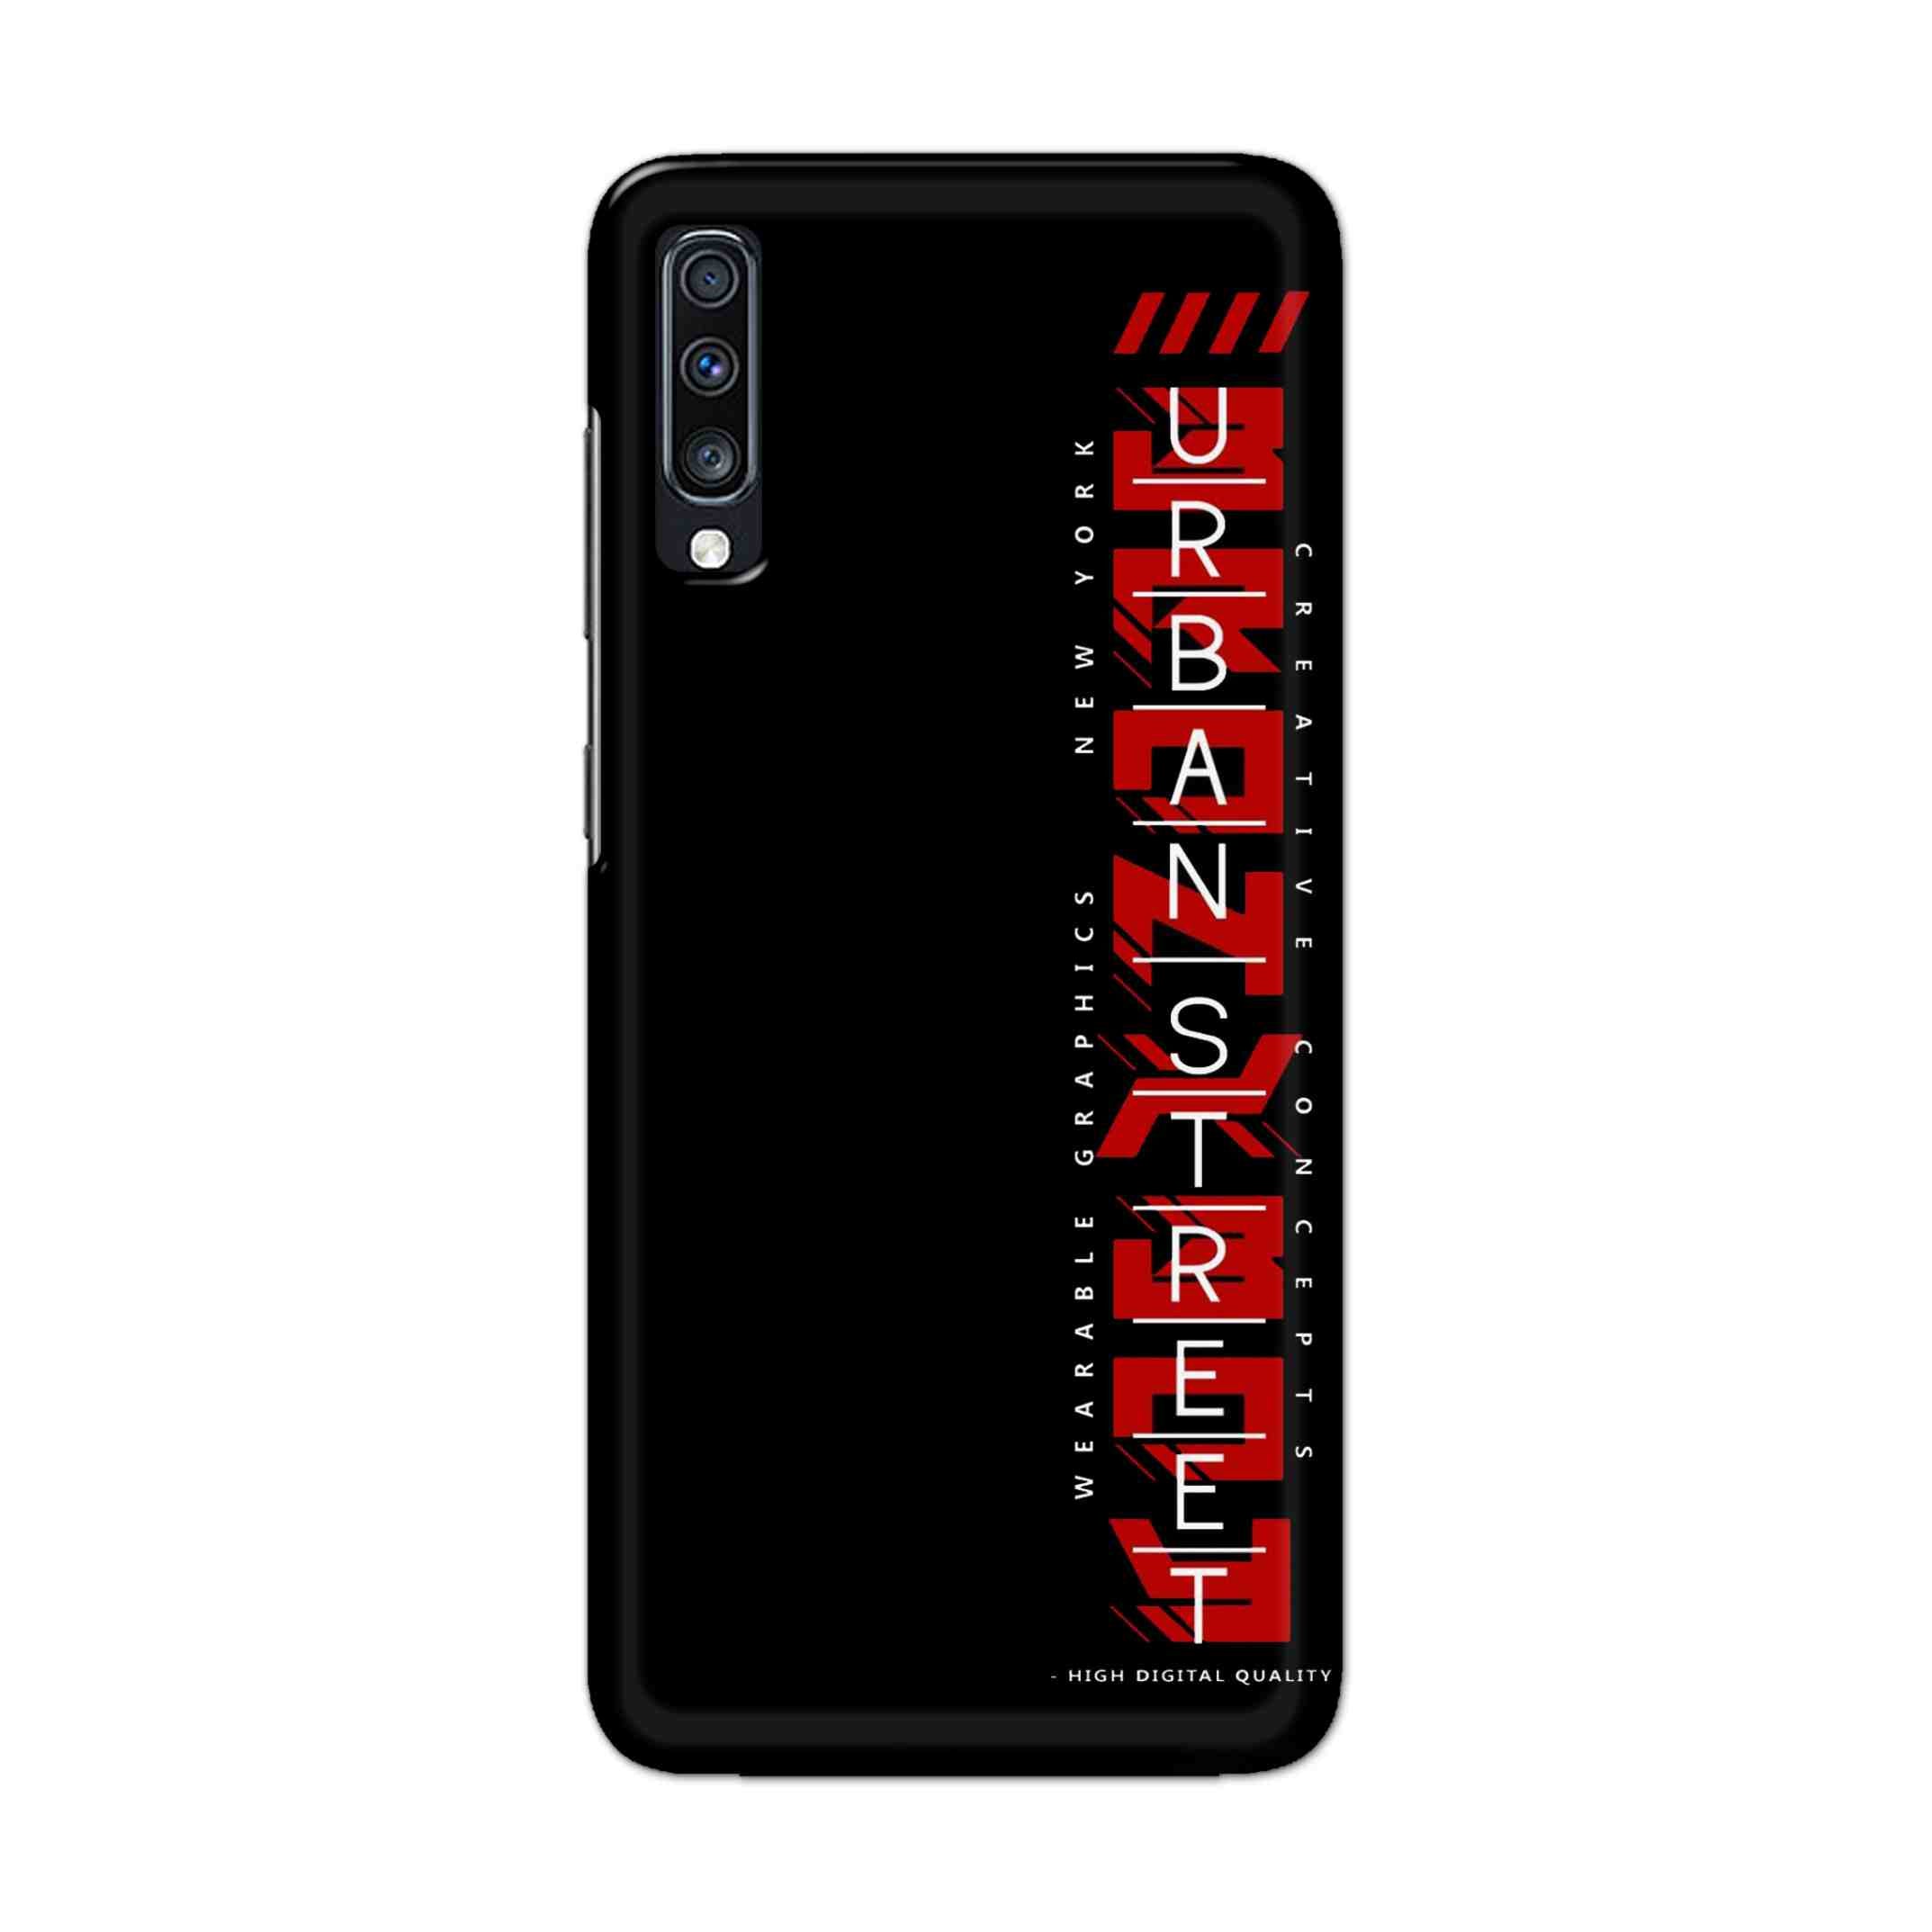 Buy Urban Street Hard Back Mobile Phone Case Cover For Samsung Galaxy A70 Online